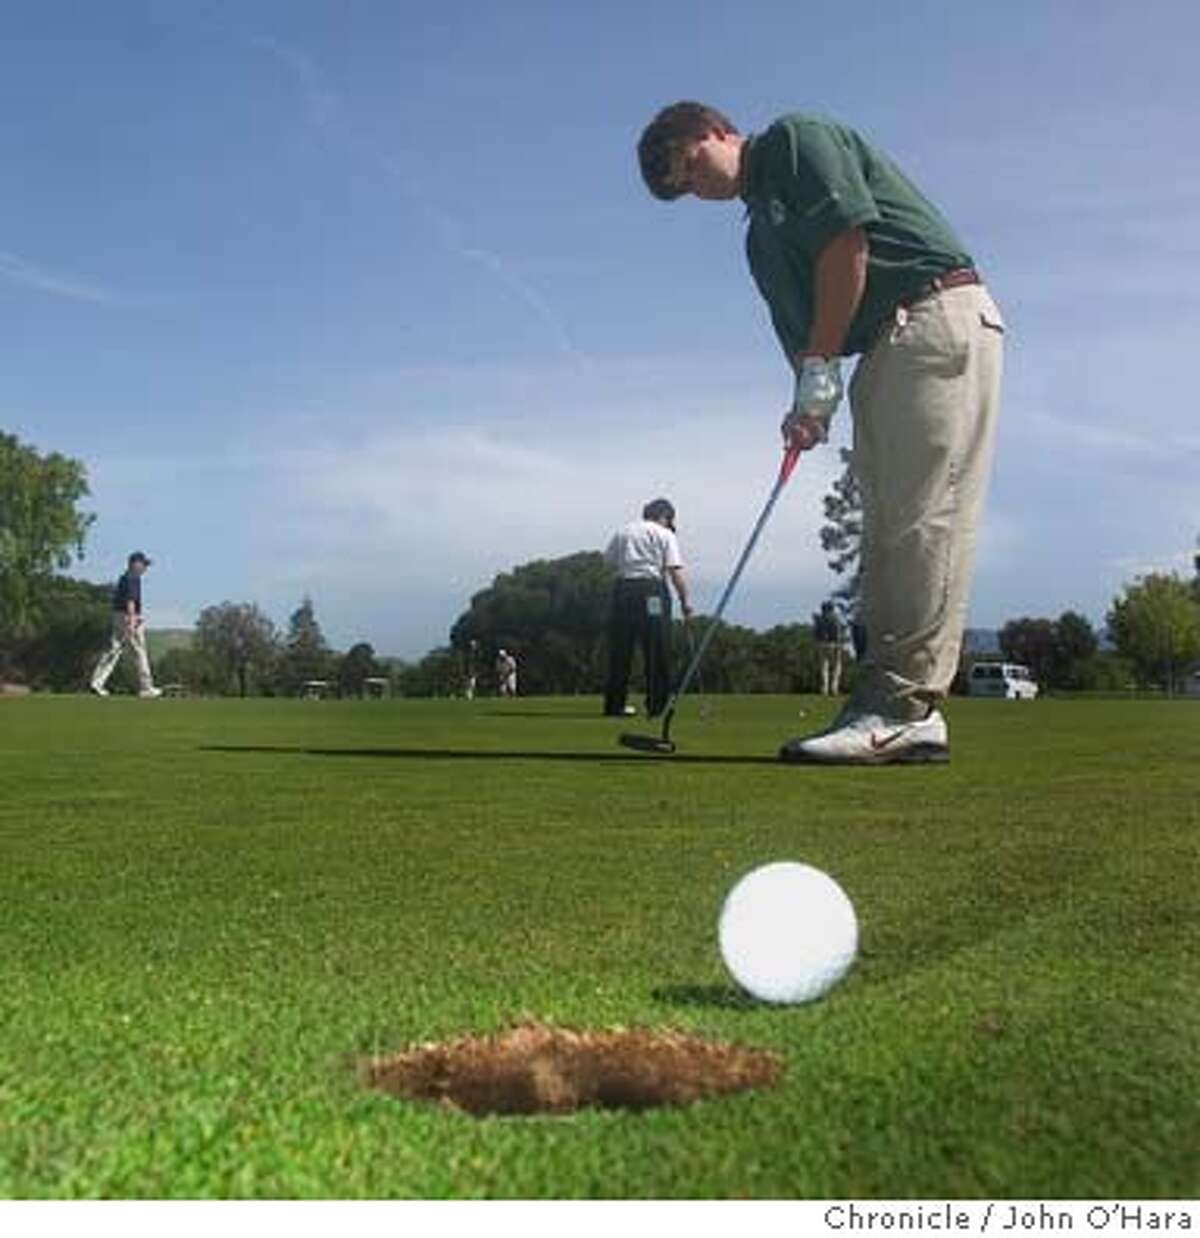 Diablo Creek Golf Course, Concord, CA. Roberto Galletti, practices on the putting green DeLasalle Golf Team just before a match Photo/ John O'Hara